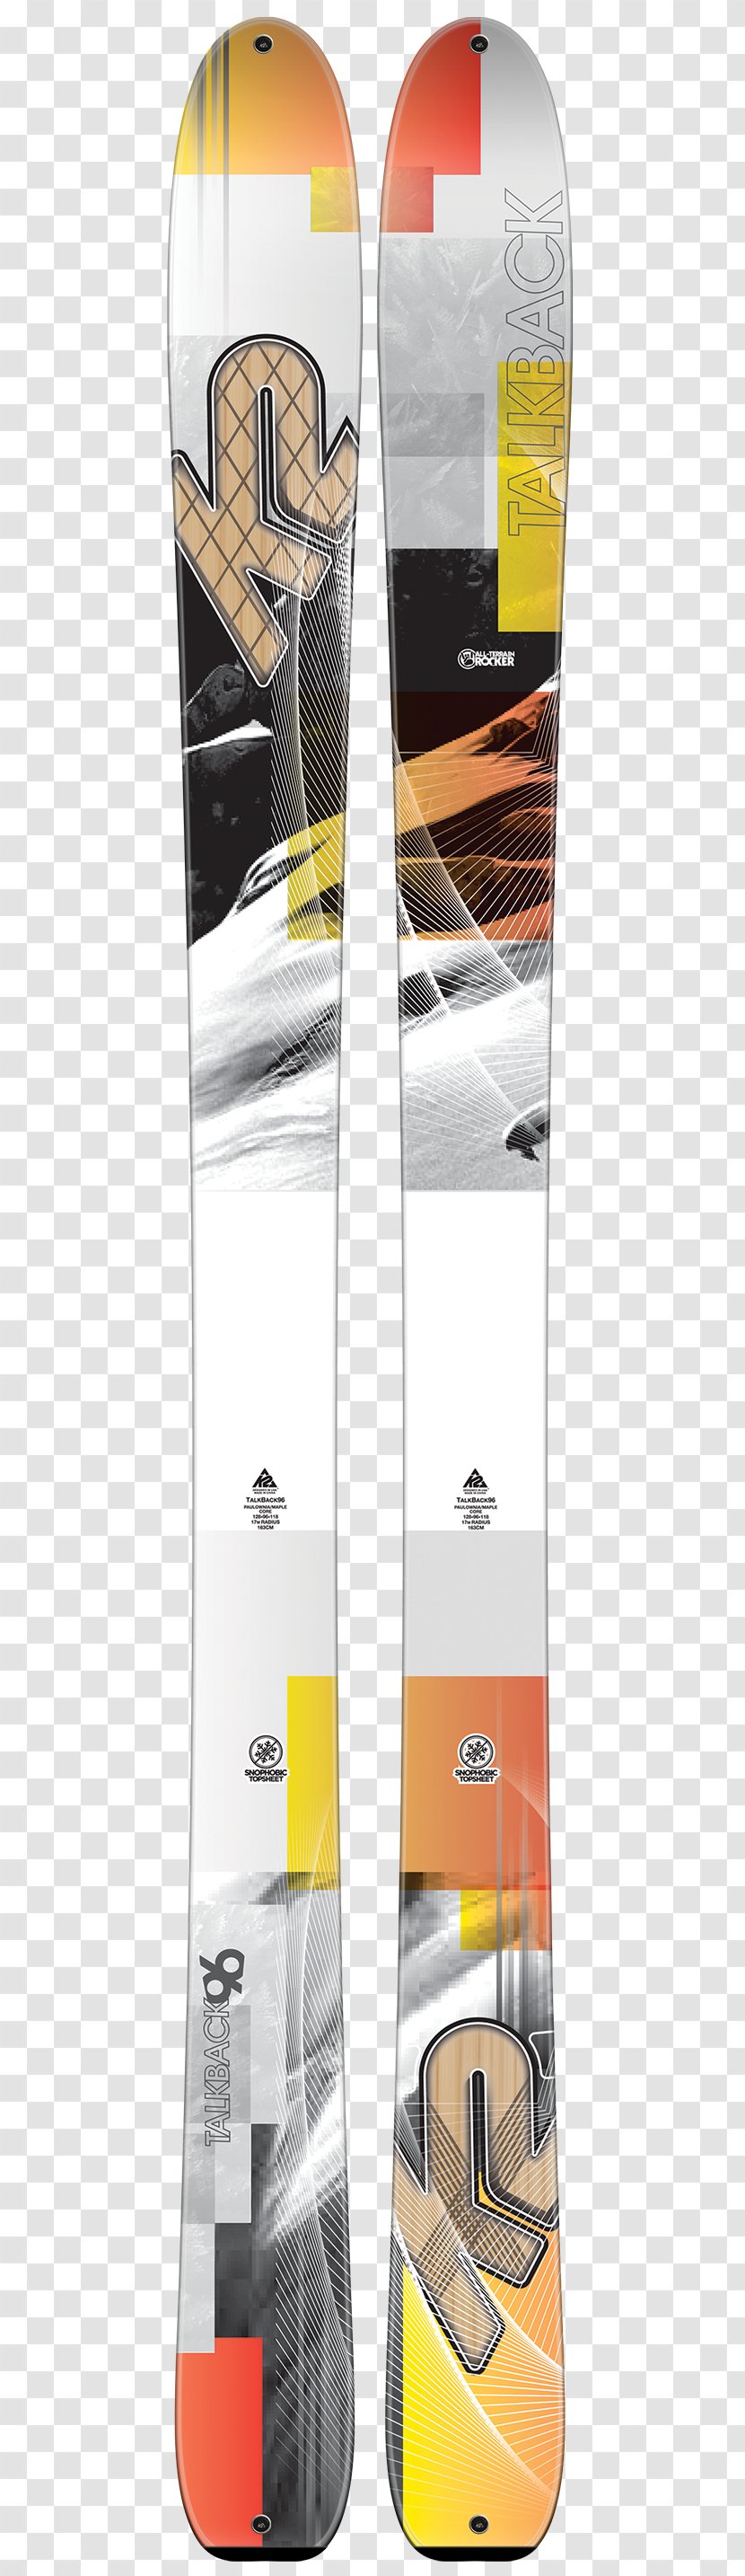 Snowboard Backcountry Skiing K2 Sports Ski Touring Transparent PNG